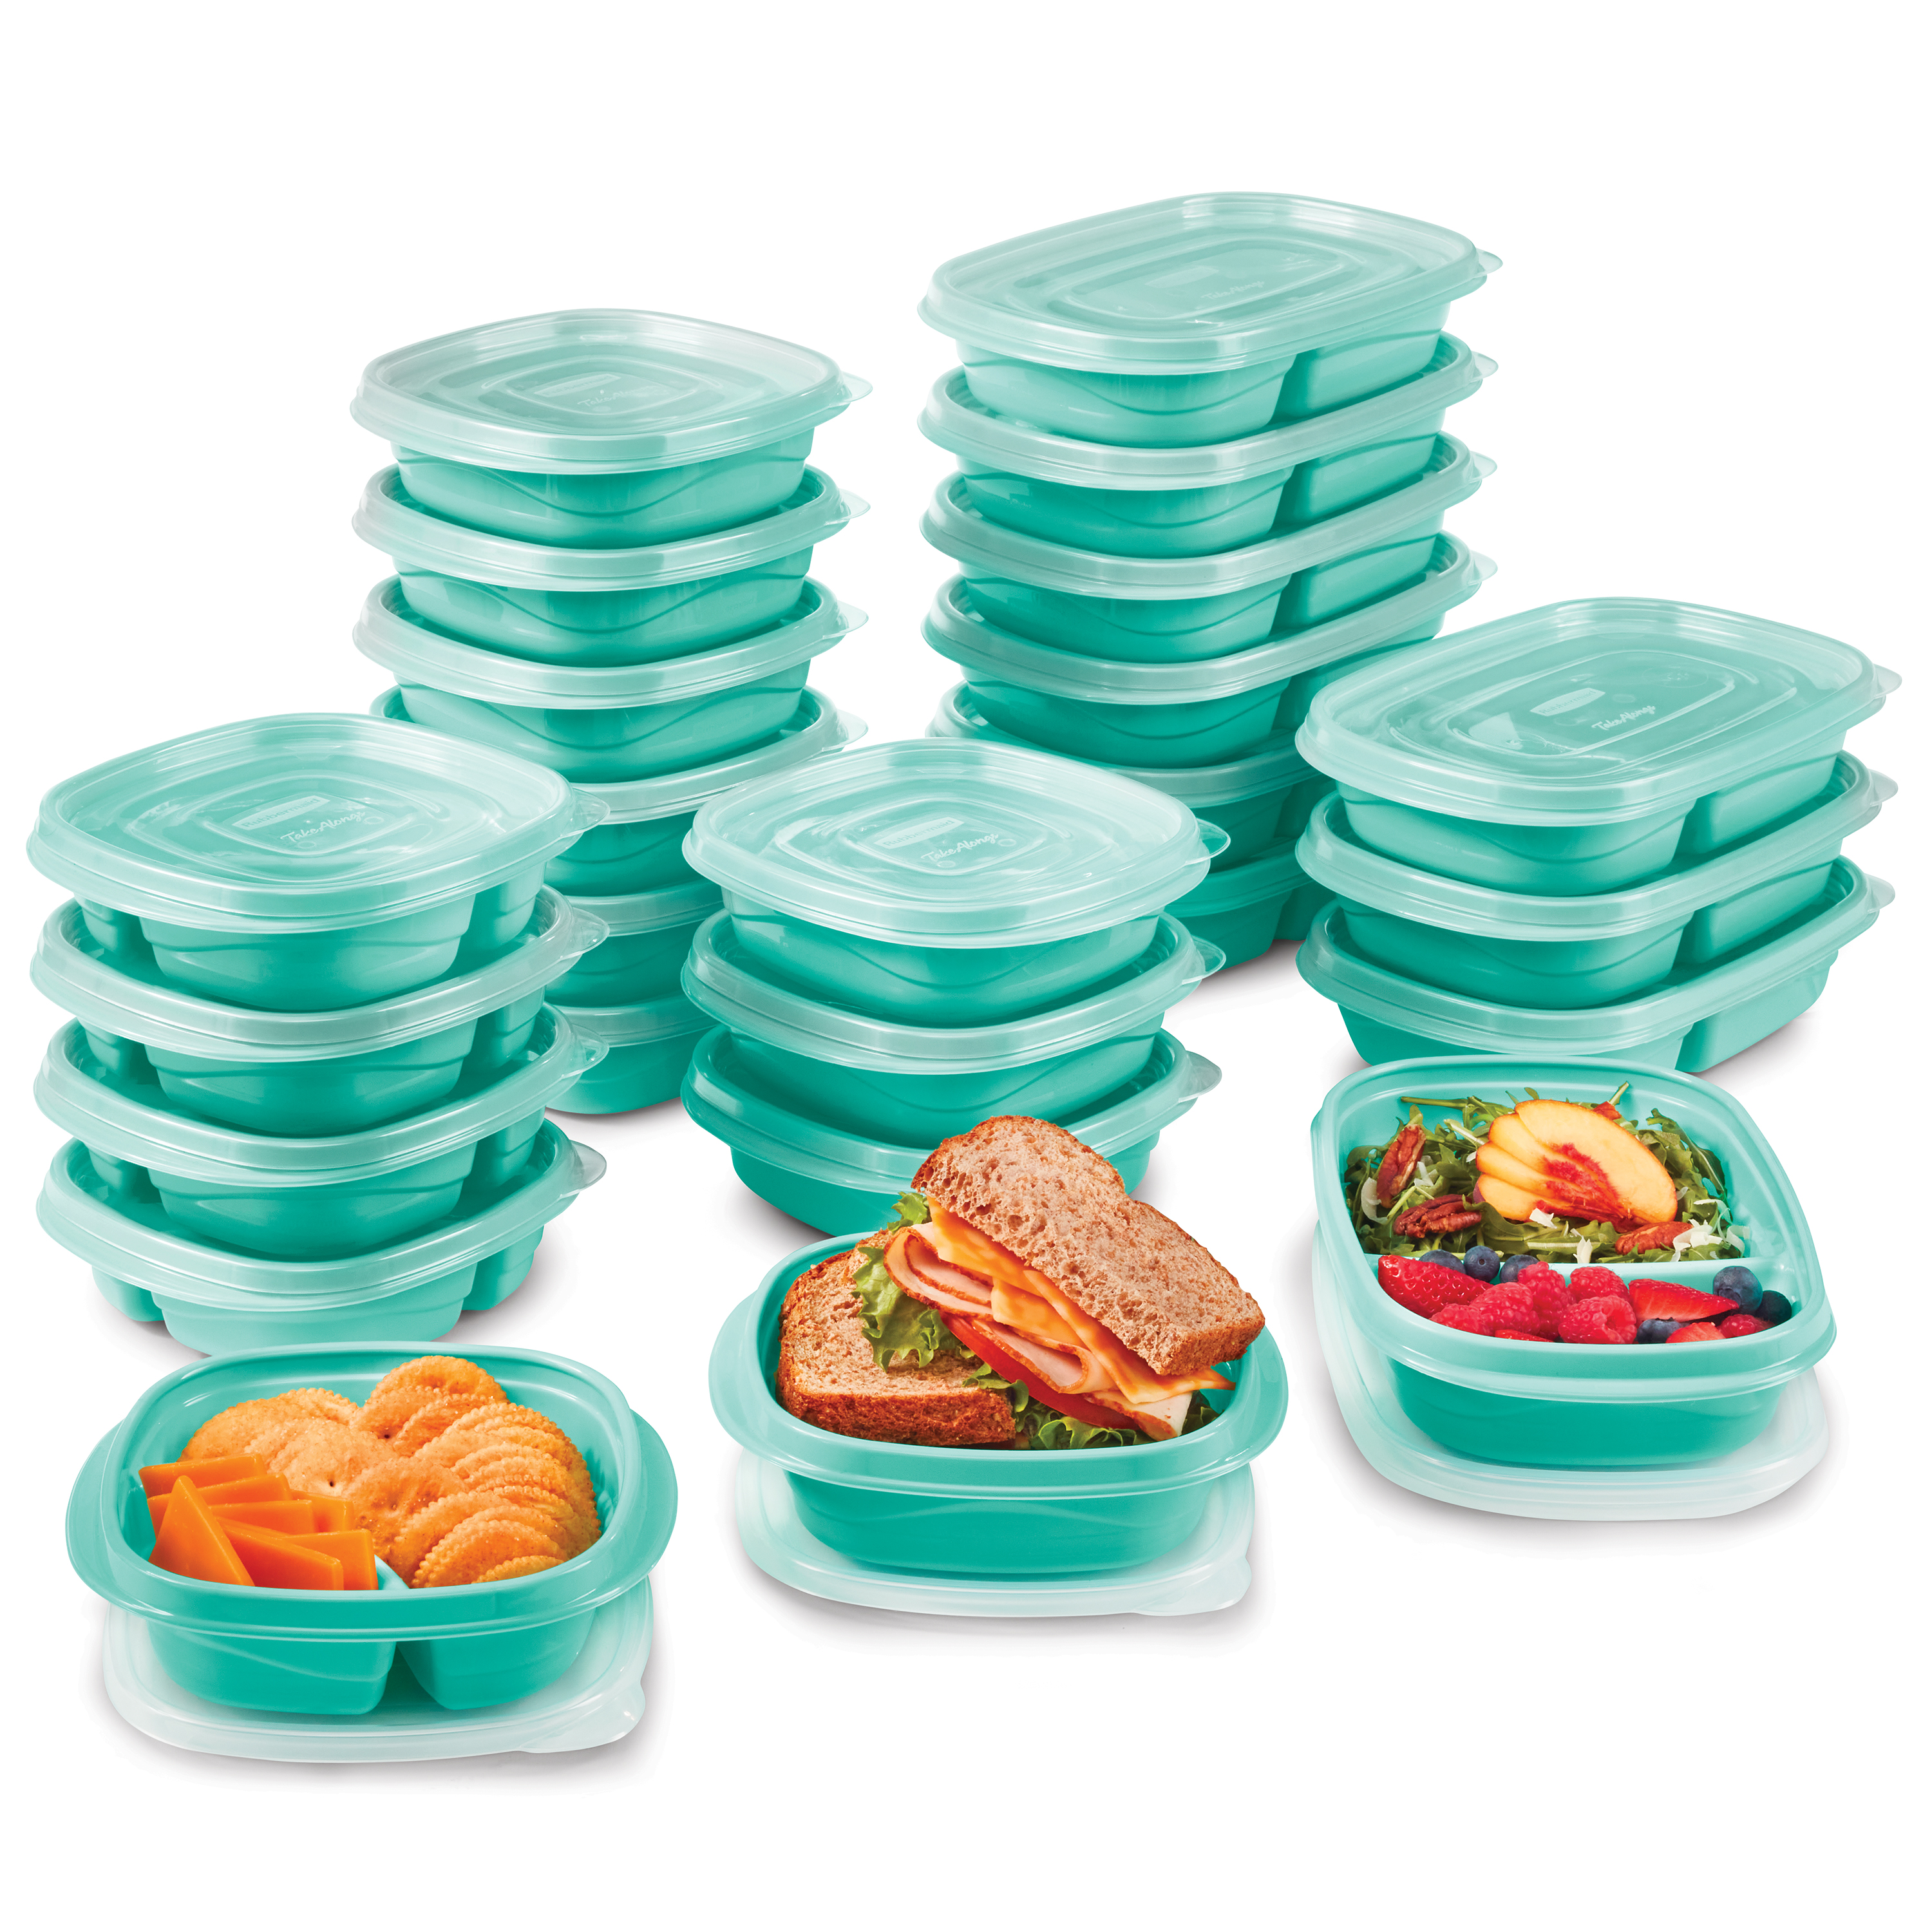 Rubbermaid TakeAlongs Variety Set of 25 Food Storage Containers, Teal Lids - image 1 of 6